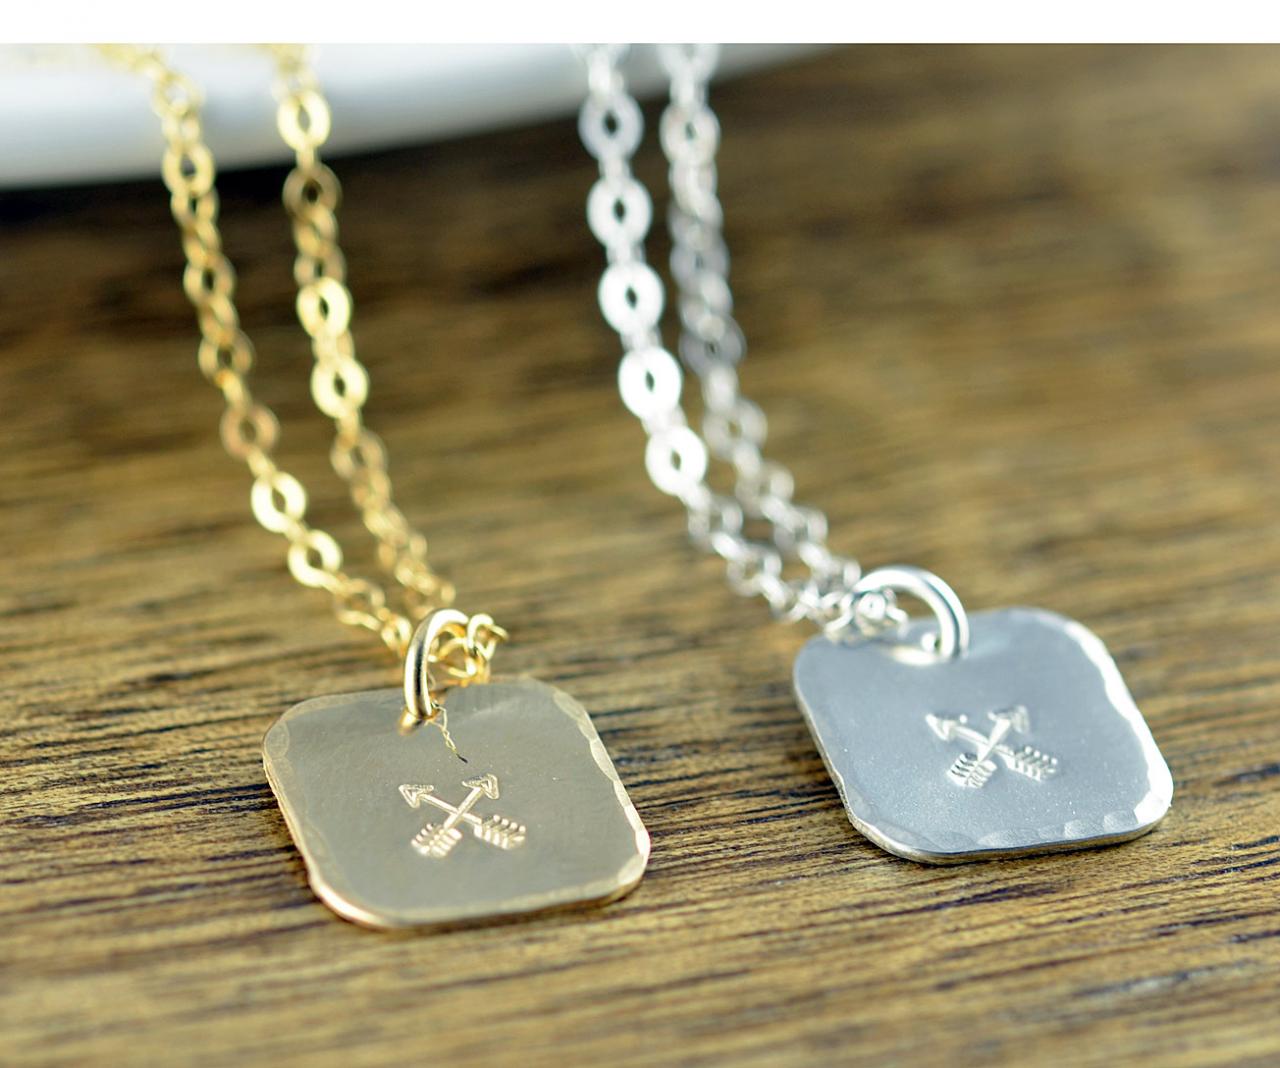 Crossed Arrow Necklace, Friendship Necklace, Friendship Arrows Necklace,crossed Arrows Charm, Friend Gift, Friends Jewelry, Gift For Bff